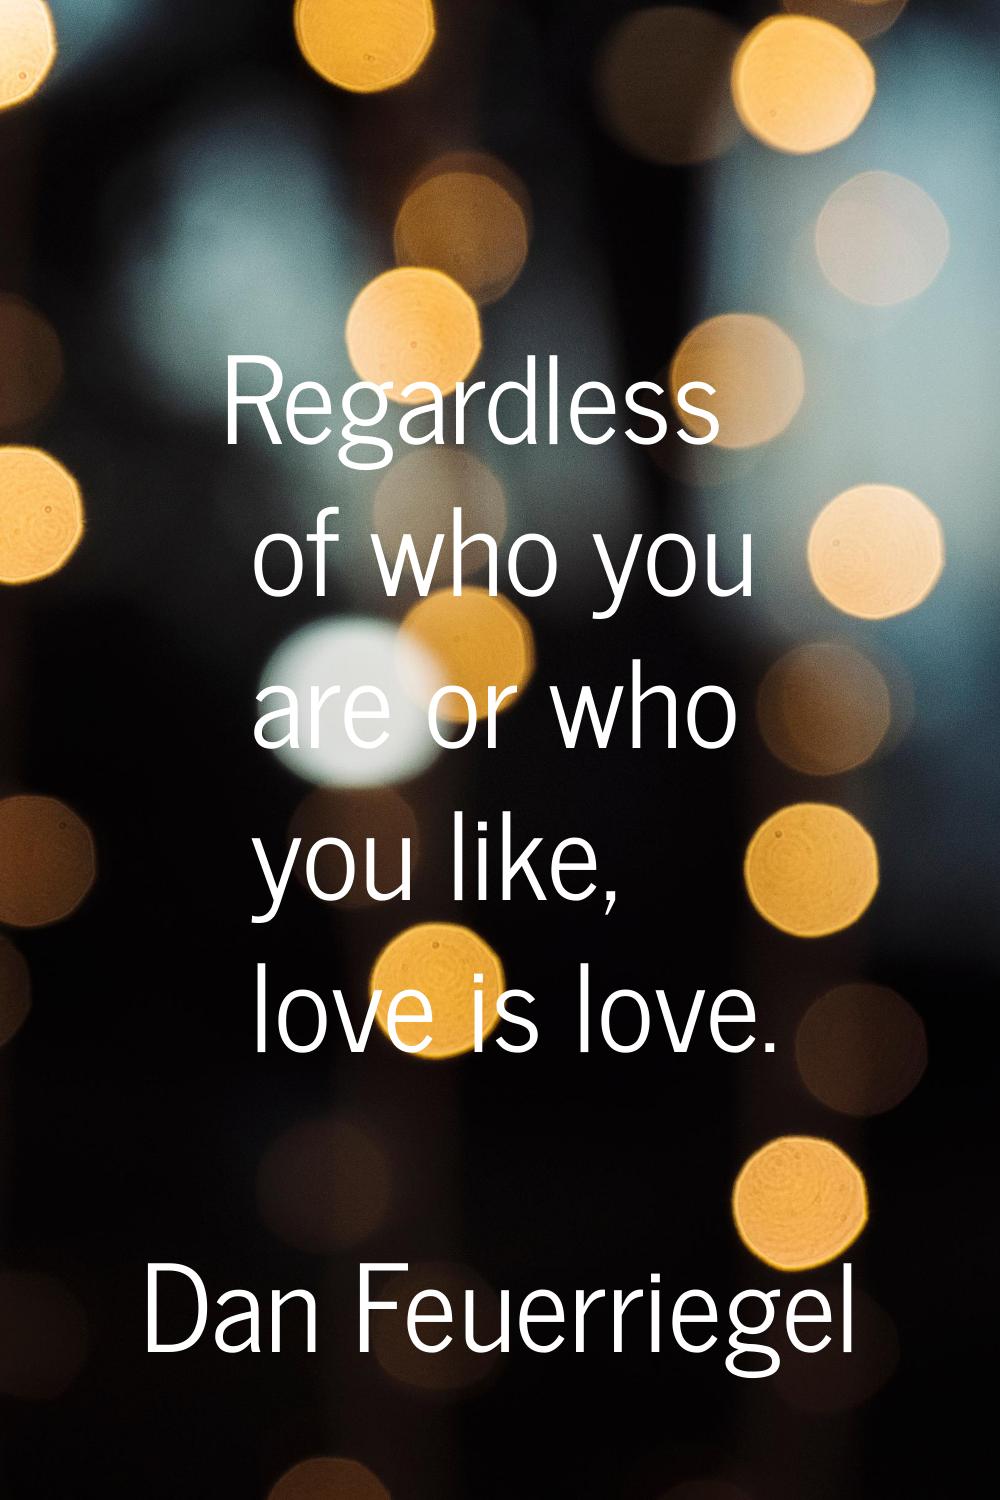 Regardless of who you are or who you like, love is love.